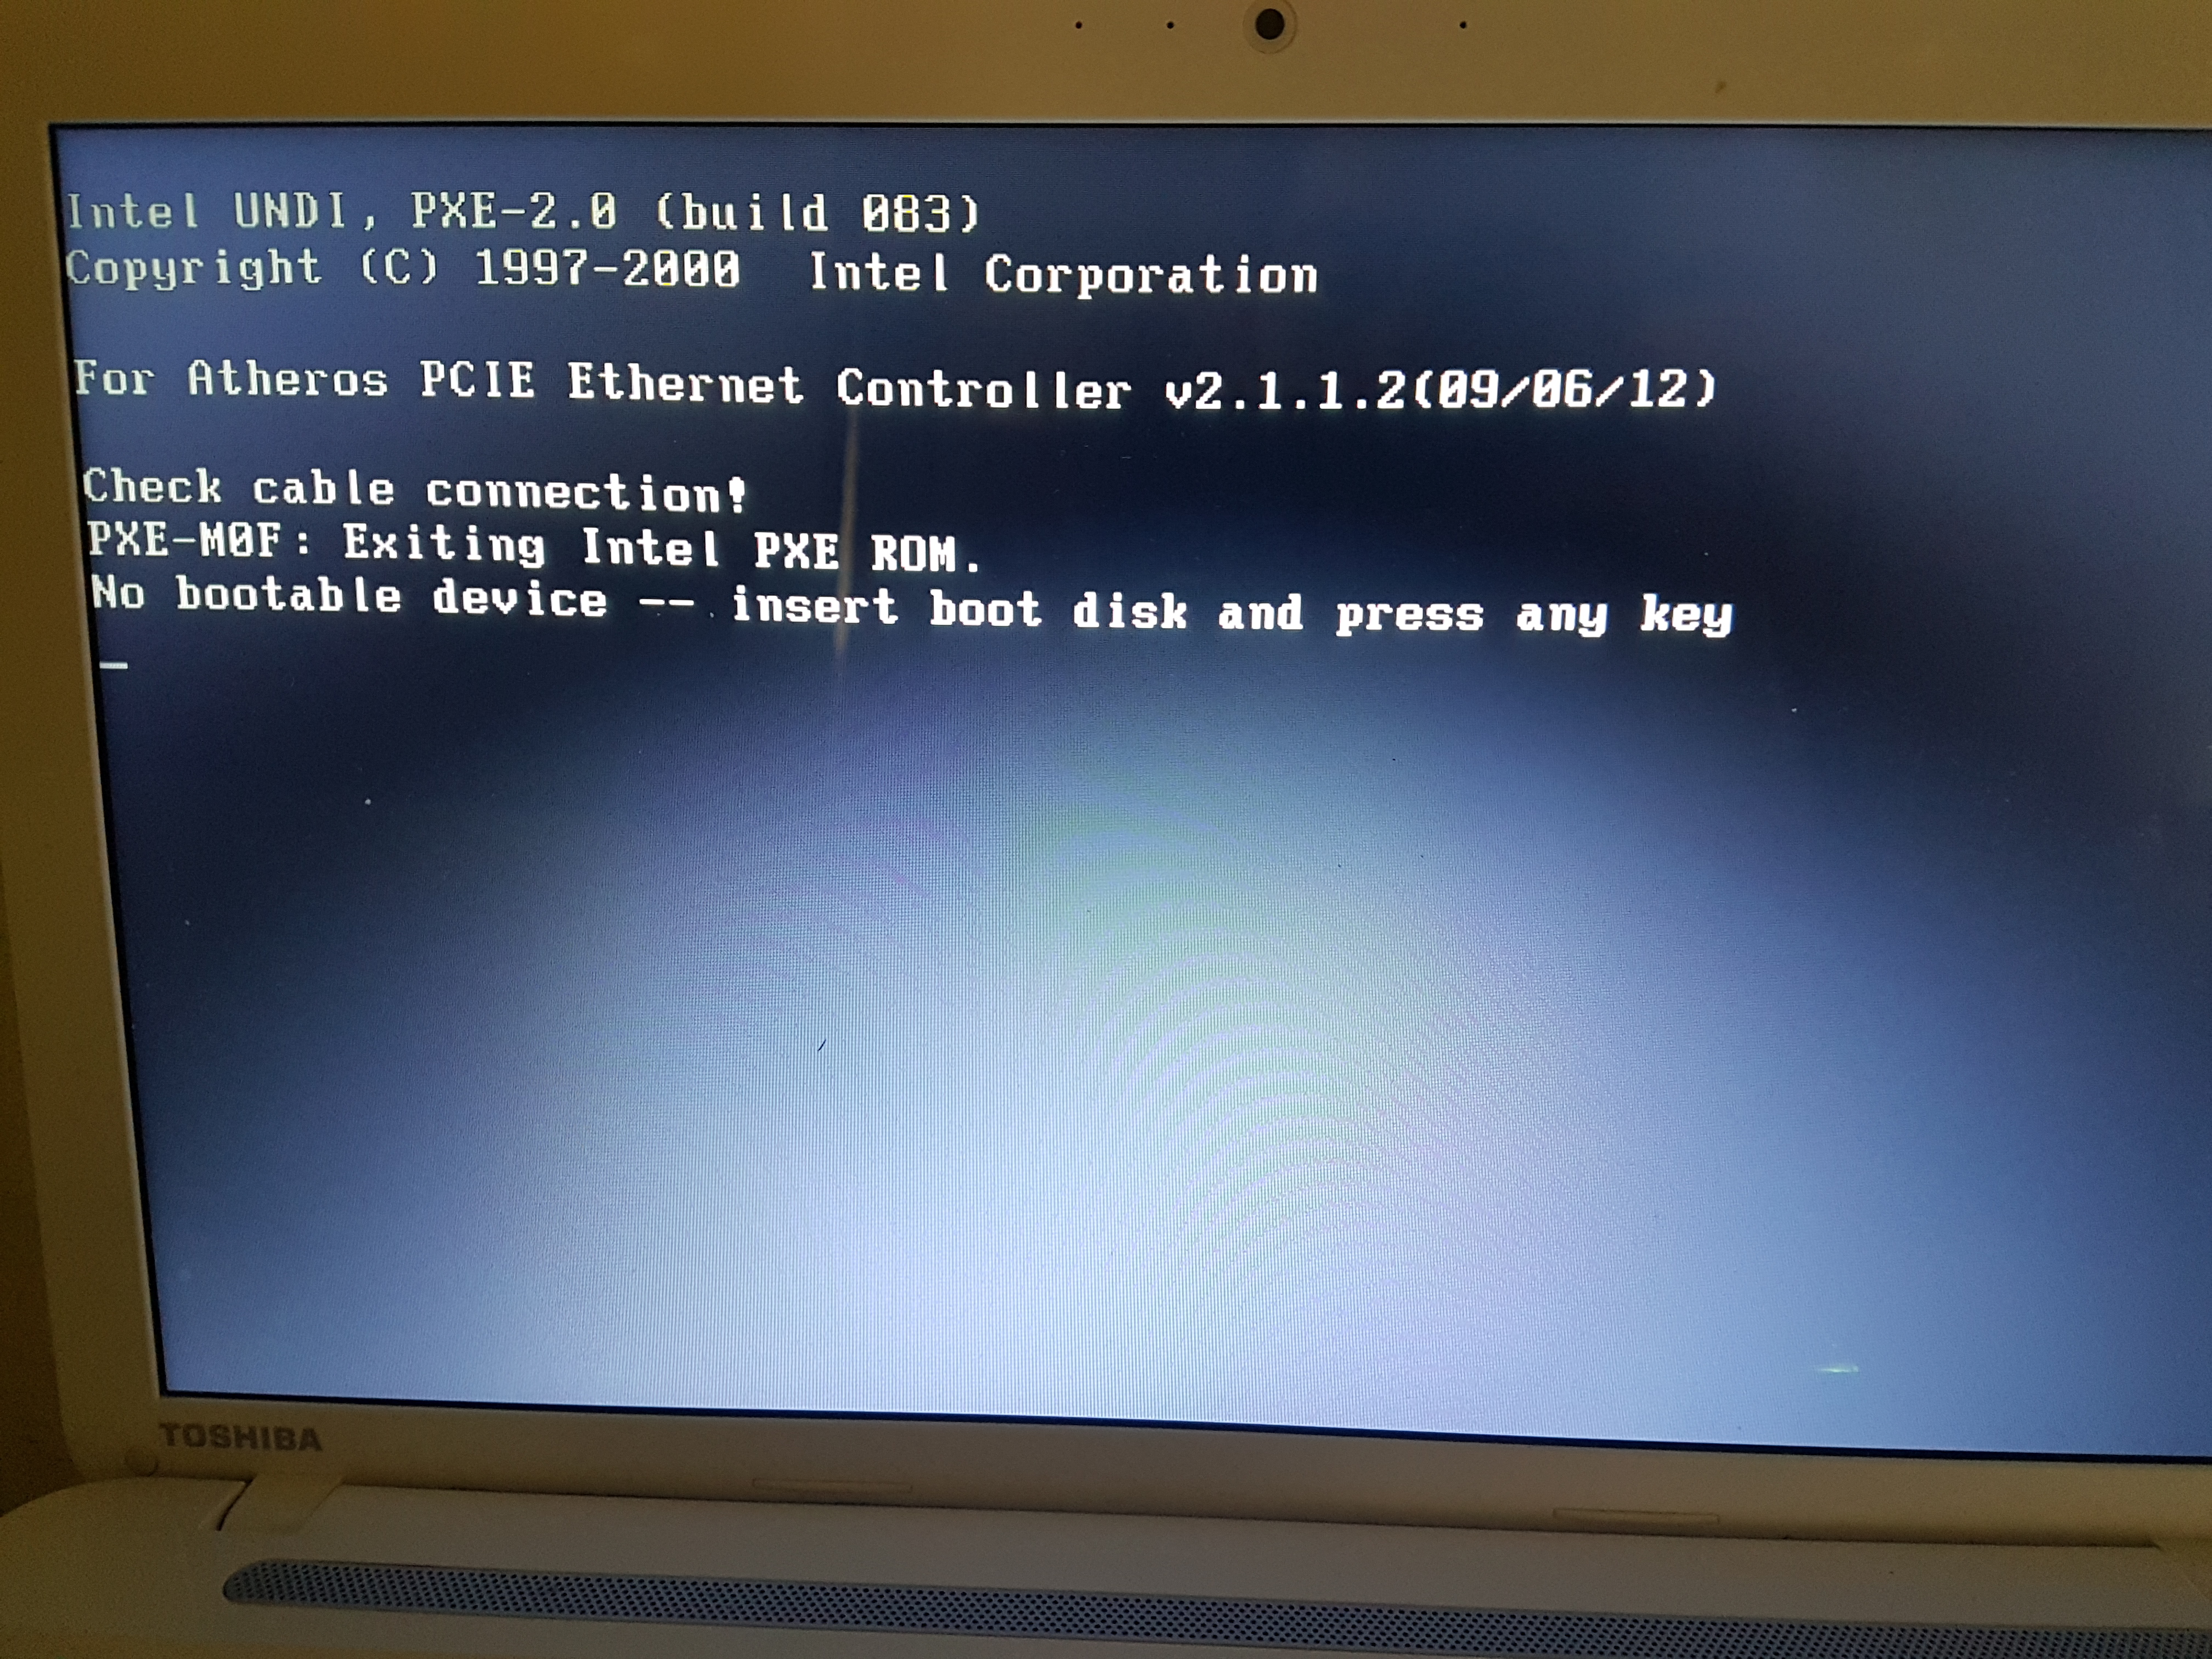 no bootable device insert boot disk toshiba windows 8